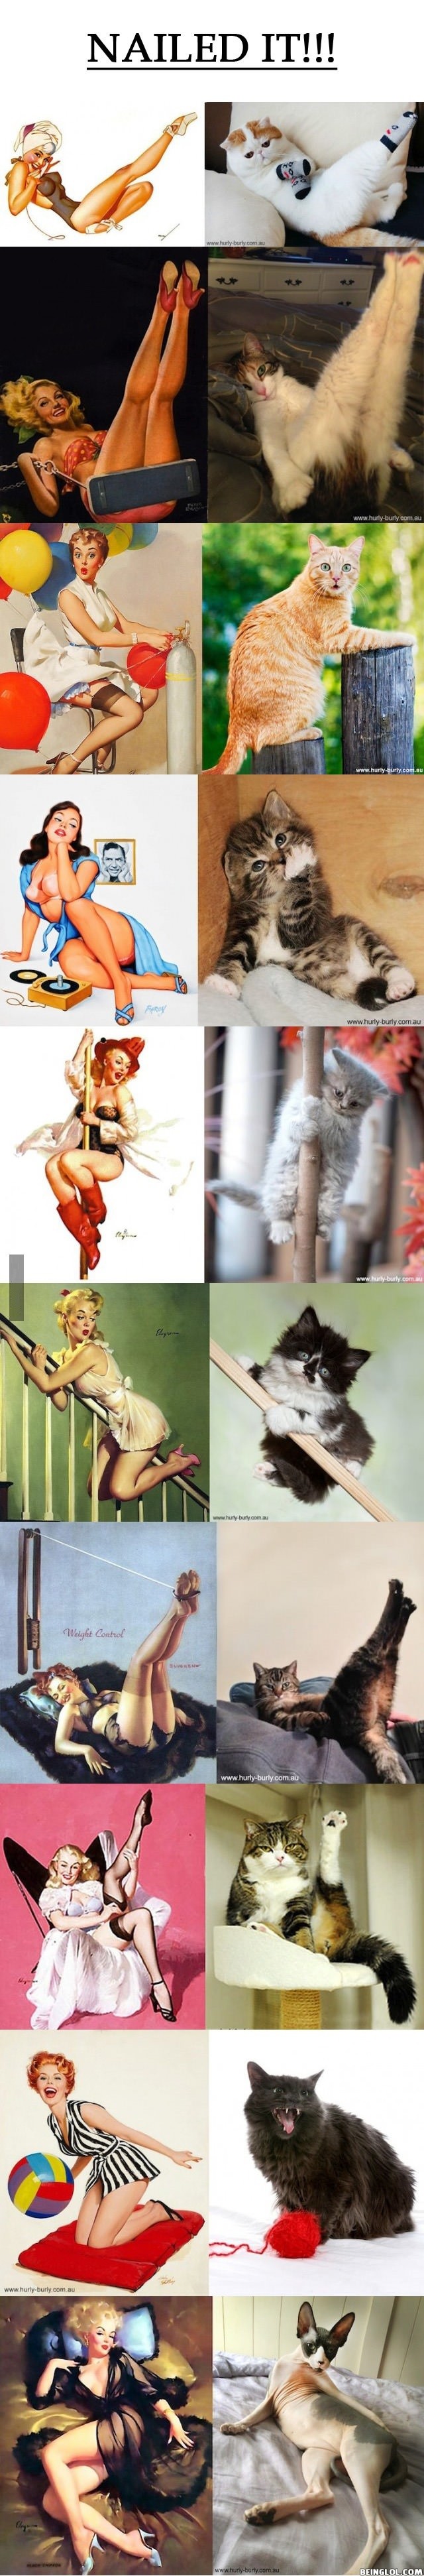 Cats That Look Like Pin-Up Girls